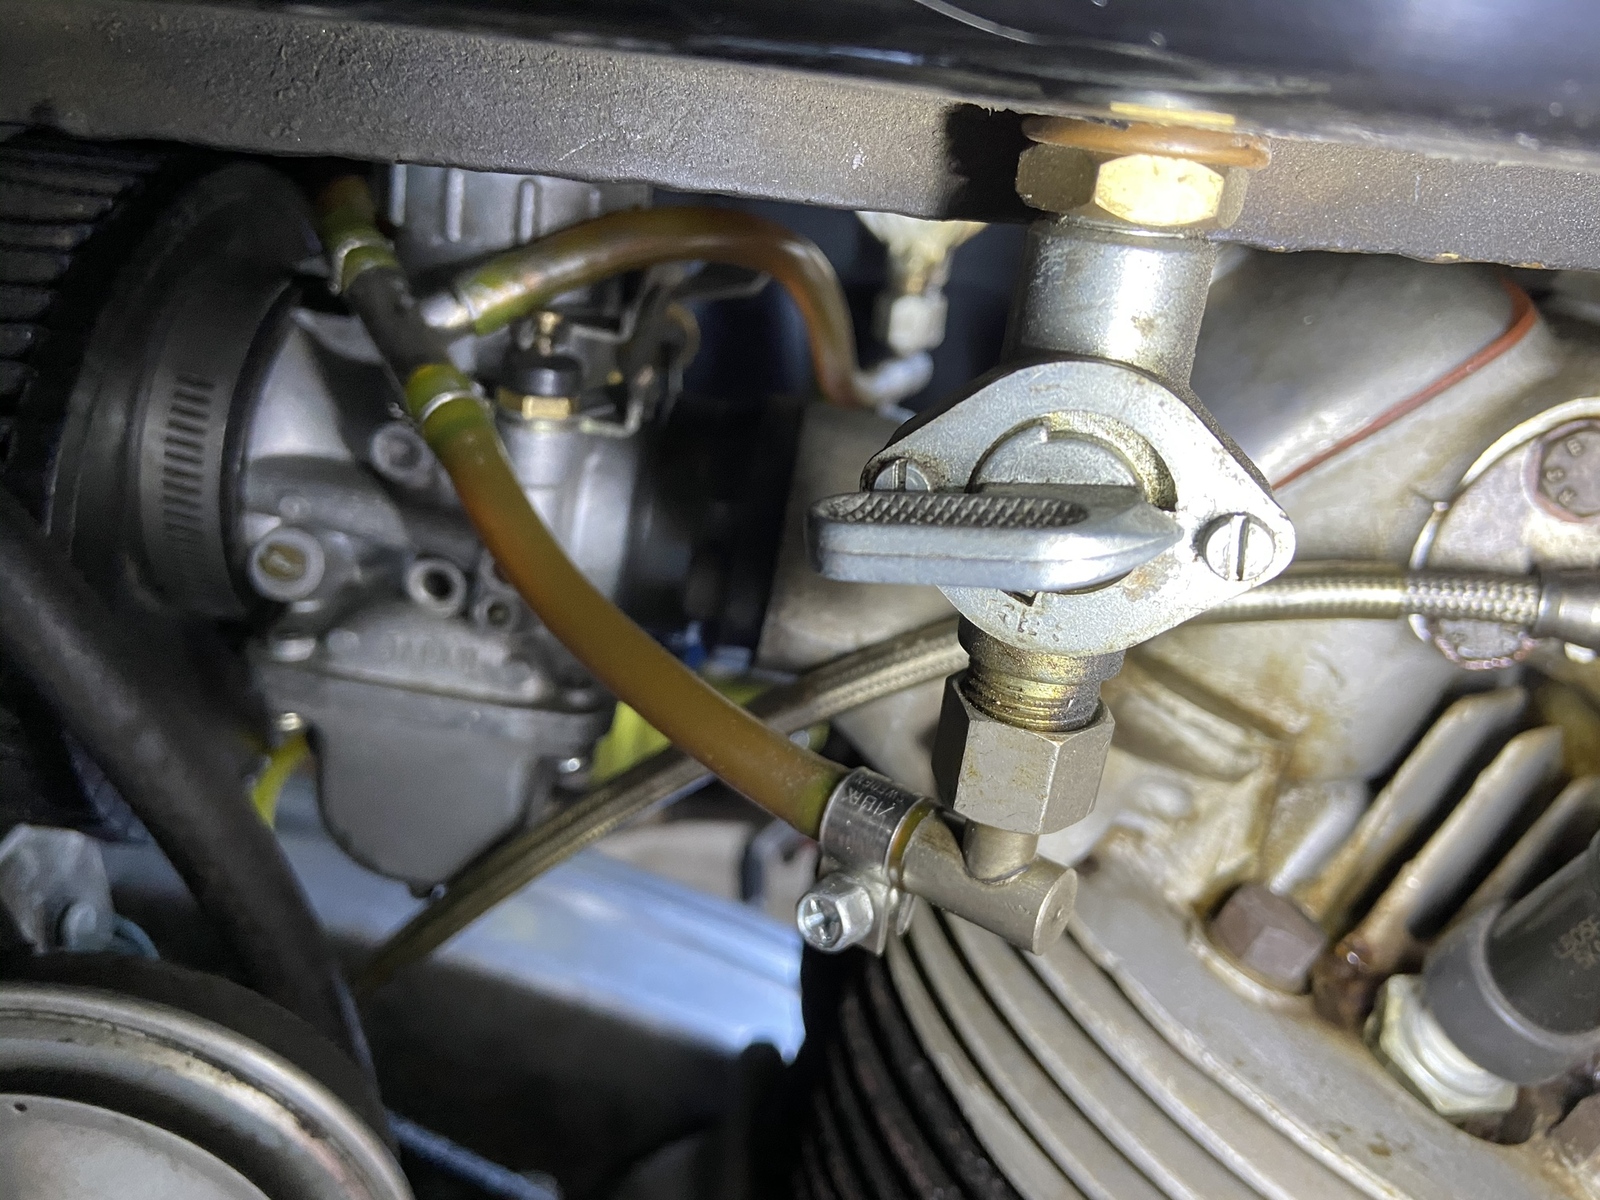 Fuel lines with a Mikuni  How to run them?